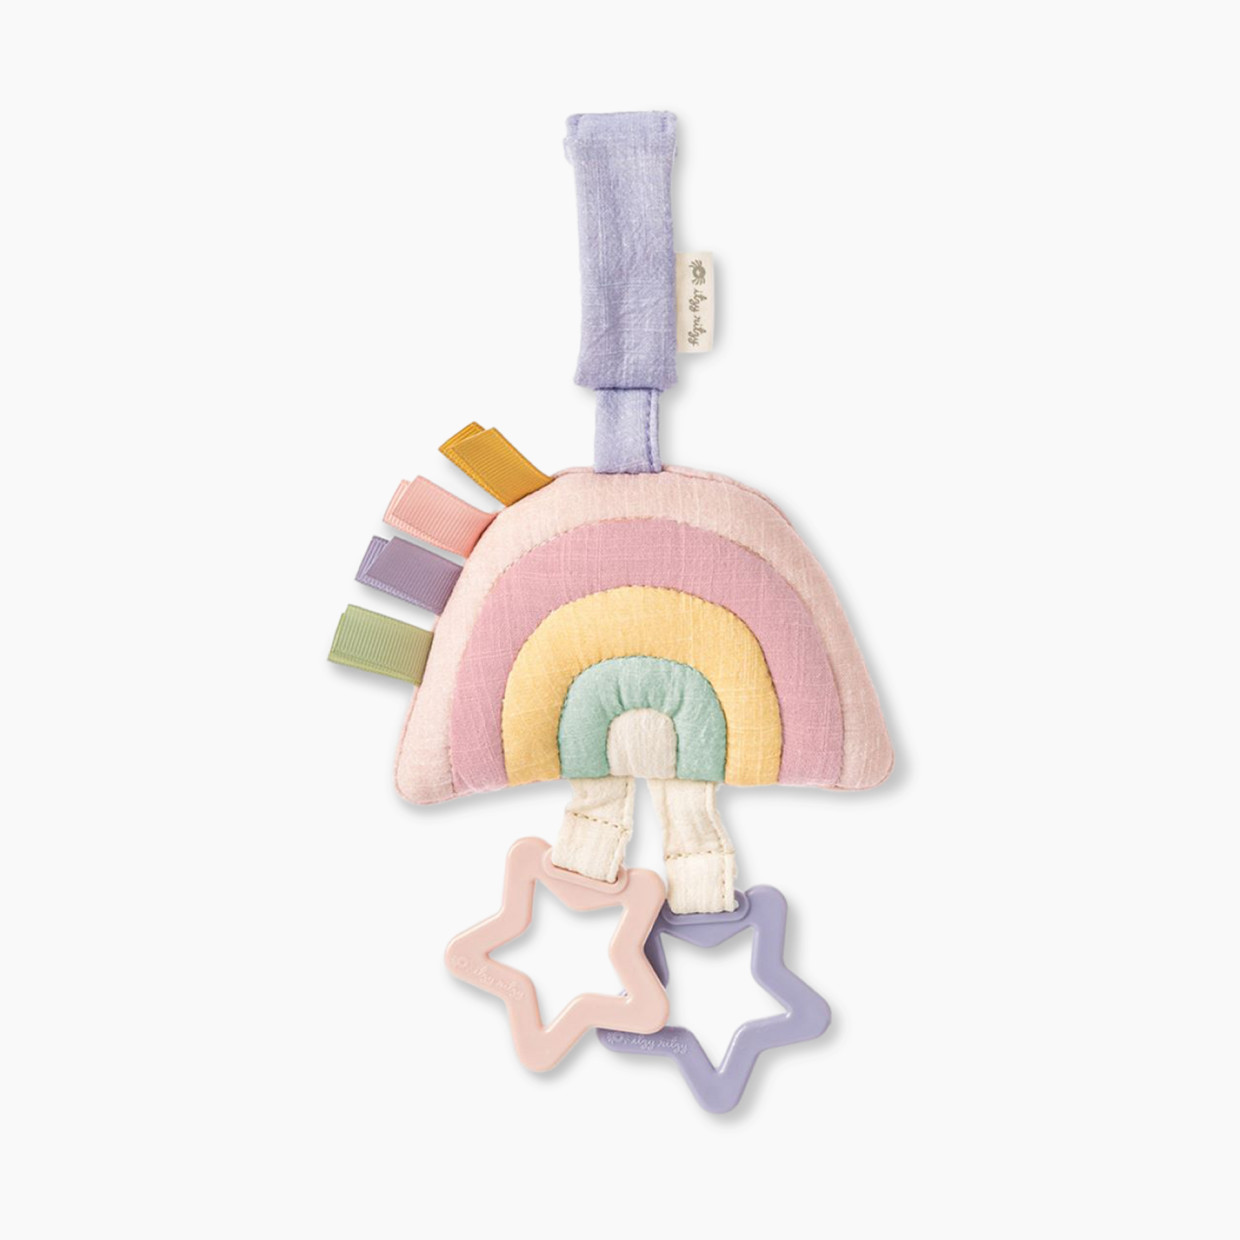 Itzy Ritzy Jingle Attachable Travel Toy - Pastel Rainbow.